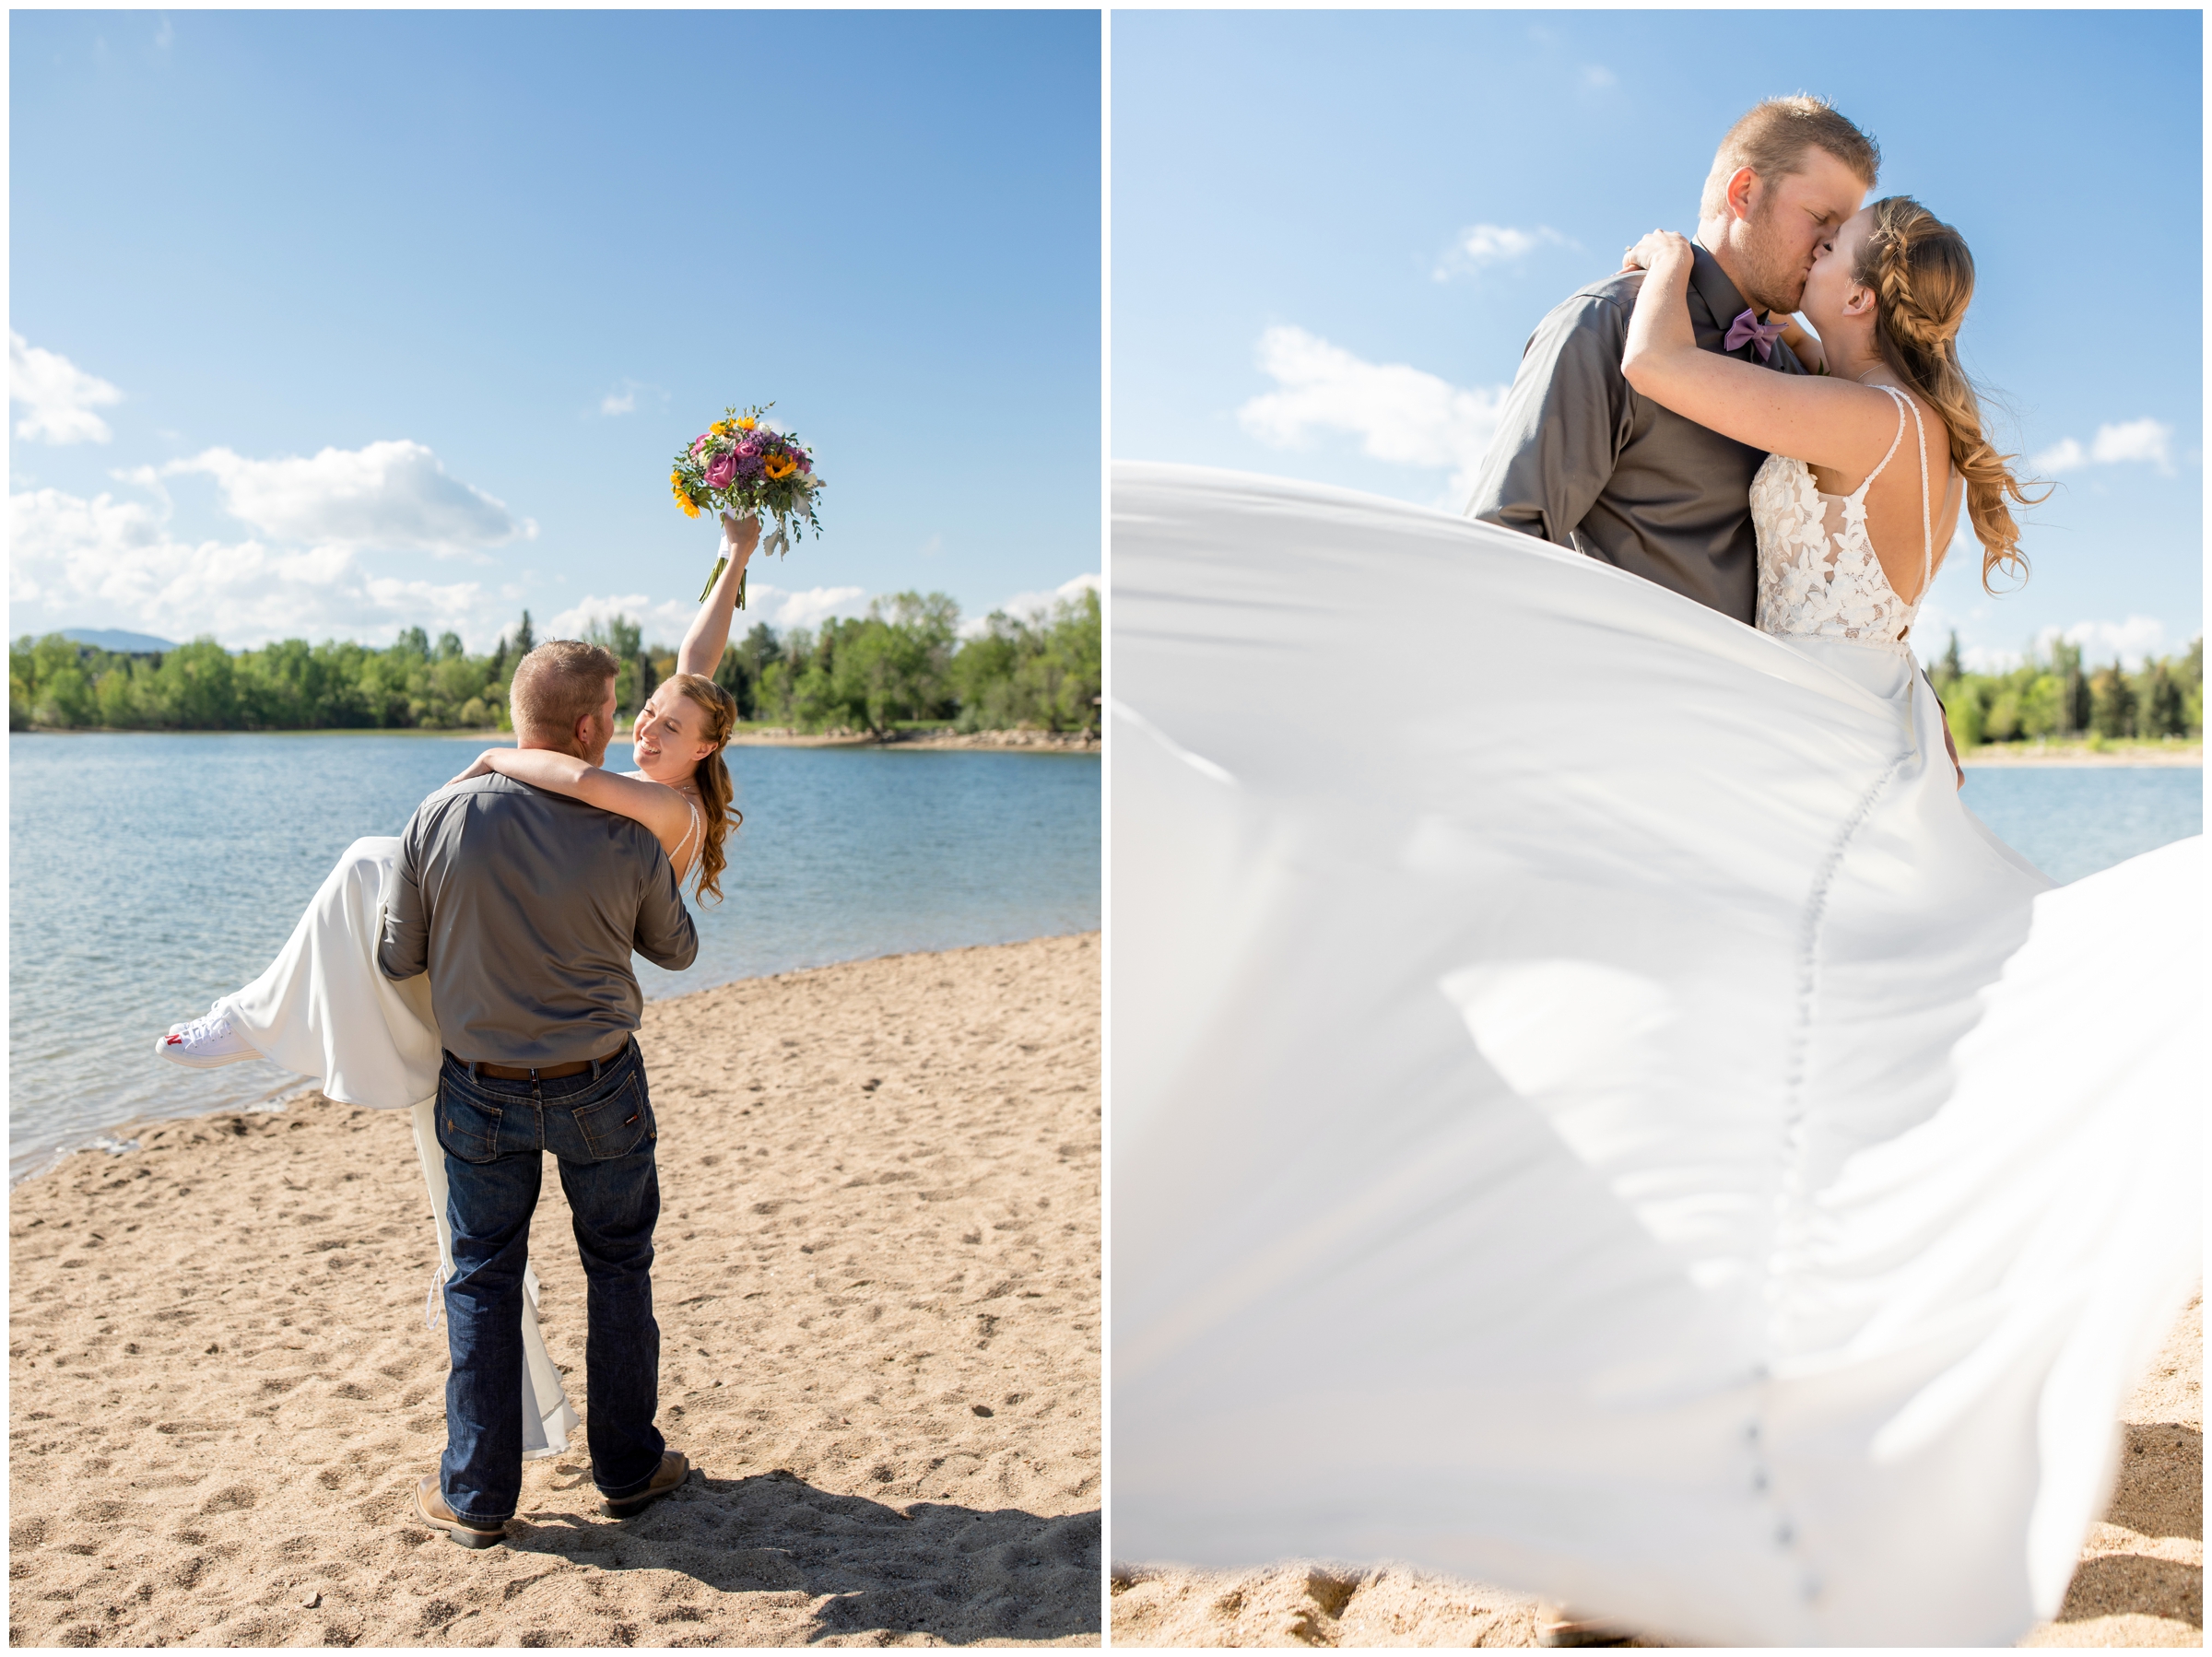 Lake Loveland wedding portraits during spring by Colorado photographer Plum Pretty Photography  